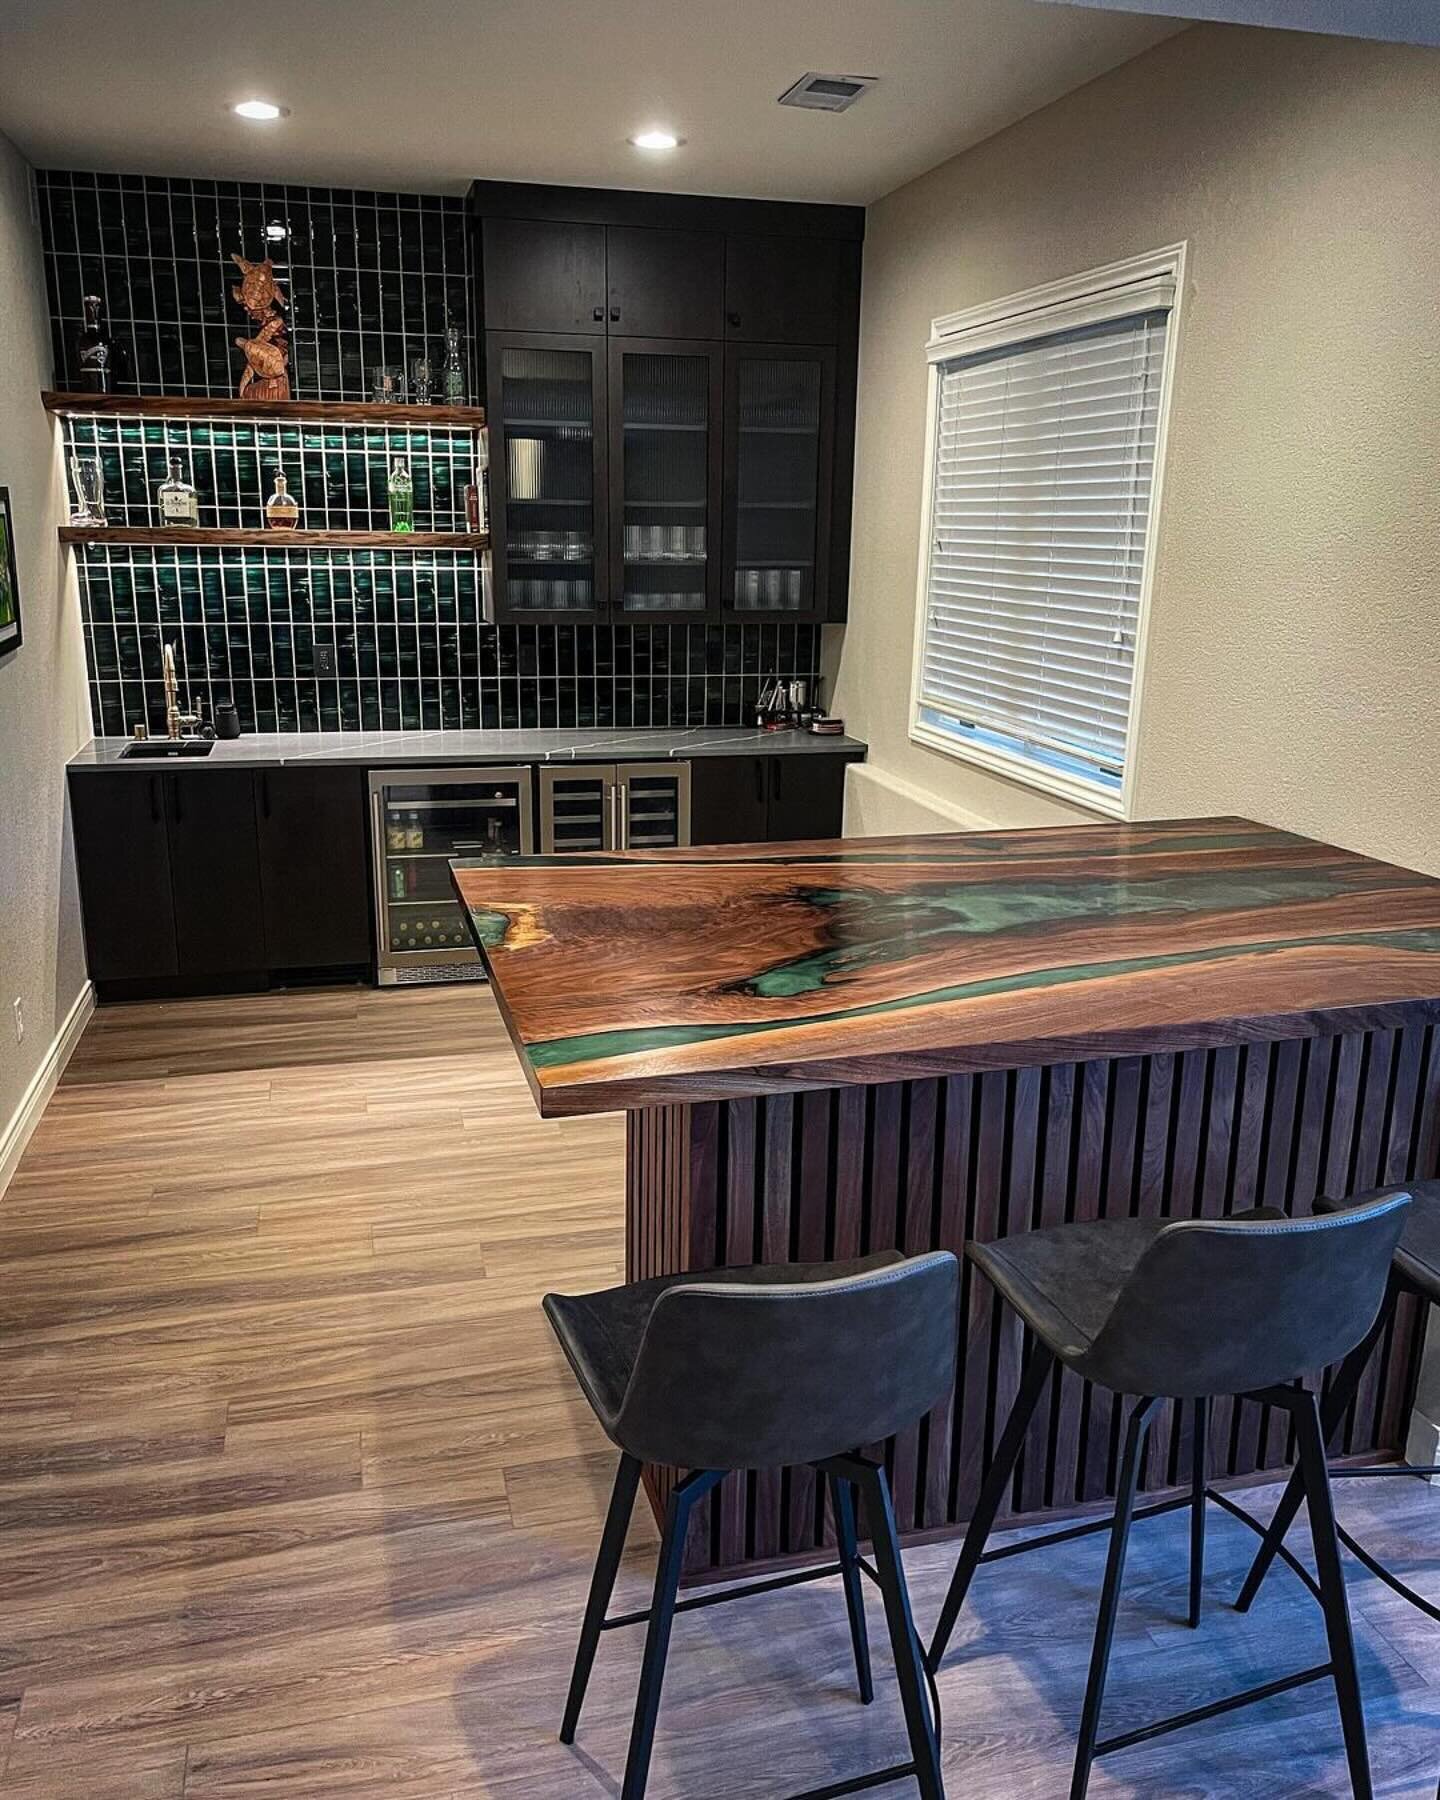 The details of this great home bar are so good. Our team of pros who made this all come together made this remodel truly awesome. 
.
@signaturedesigns.kbi 
Contractor Jim Ince 
@blacksheepwoods 
@dmkgraniteandmarble 
@coloradokitchendesigns